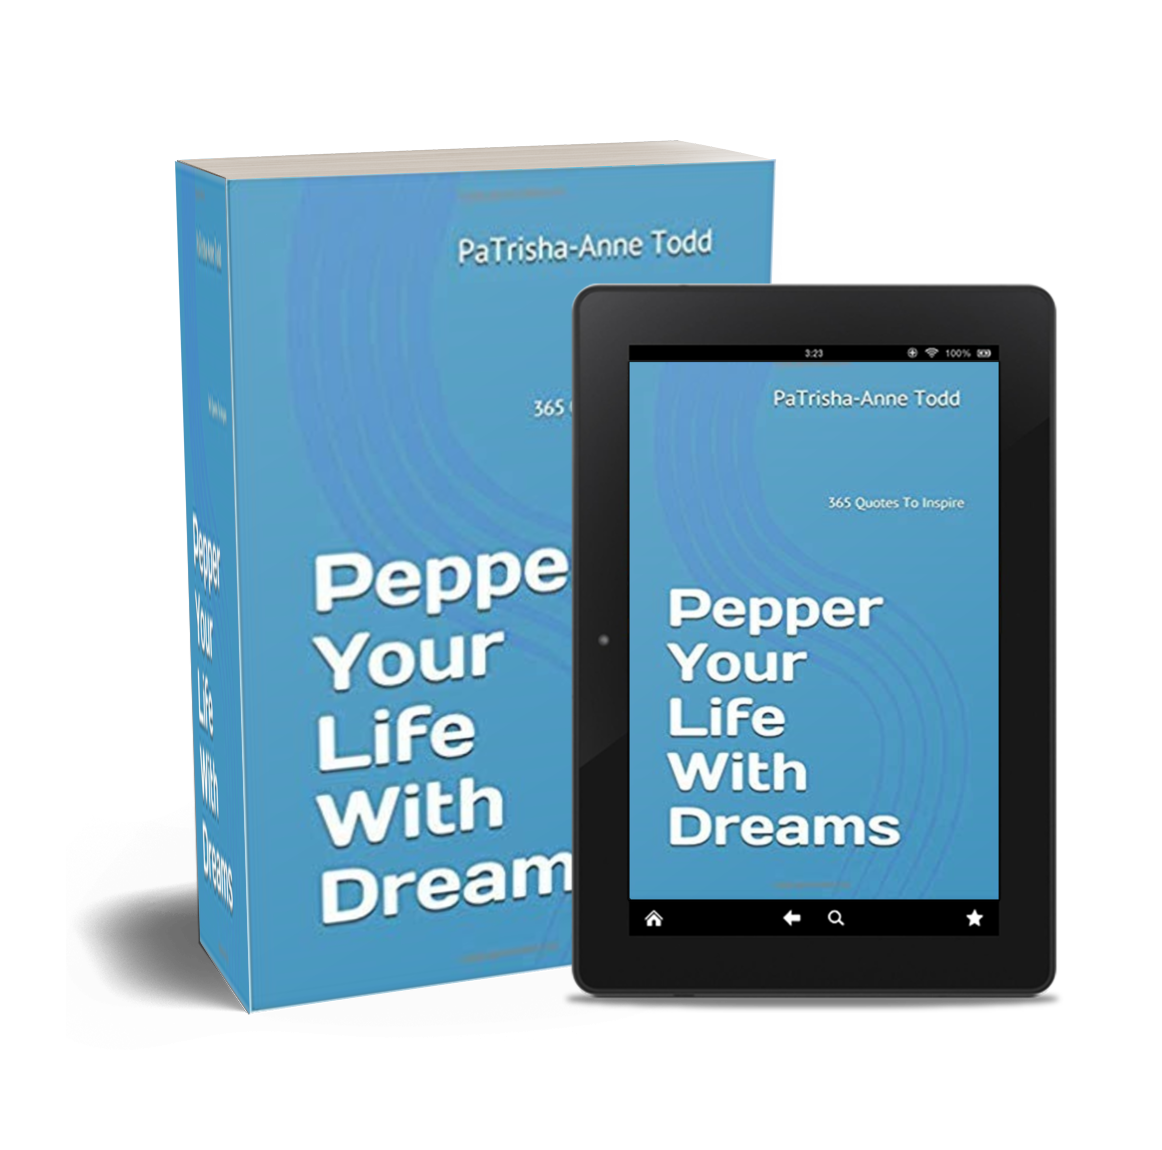 PaTrisha-Anne Todd Master Coach and Author of Pepper Your Life with Dreams at www.CoachingLeadsToSuccess.com shares tips and strategies to Live Life by Design